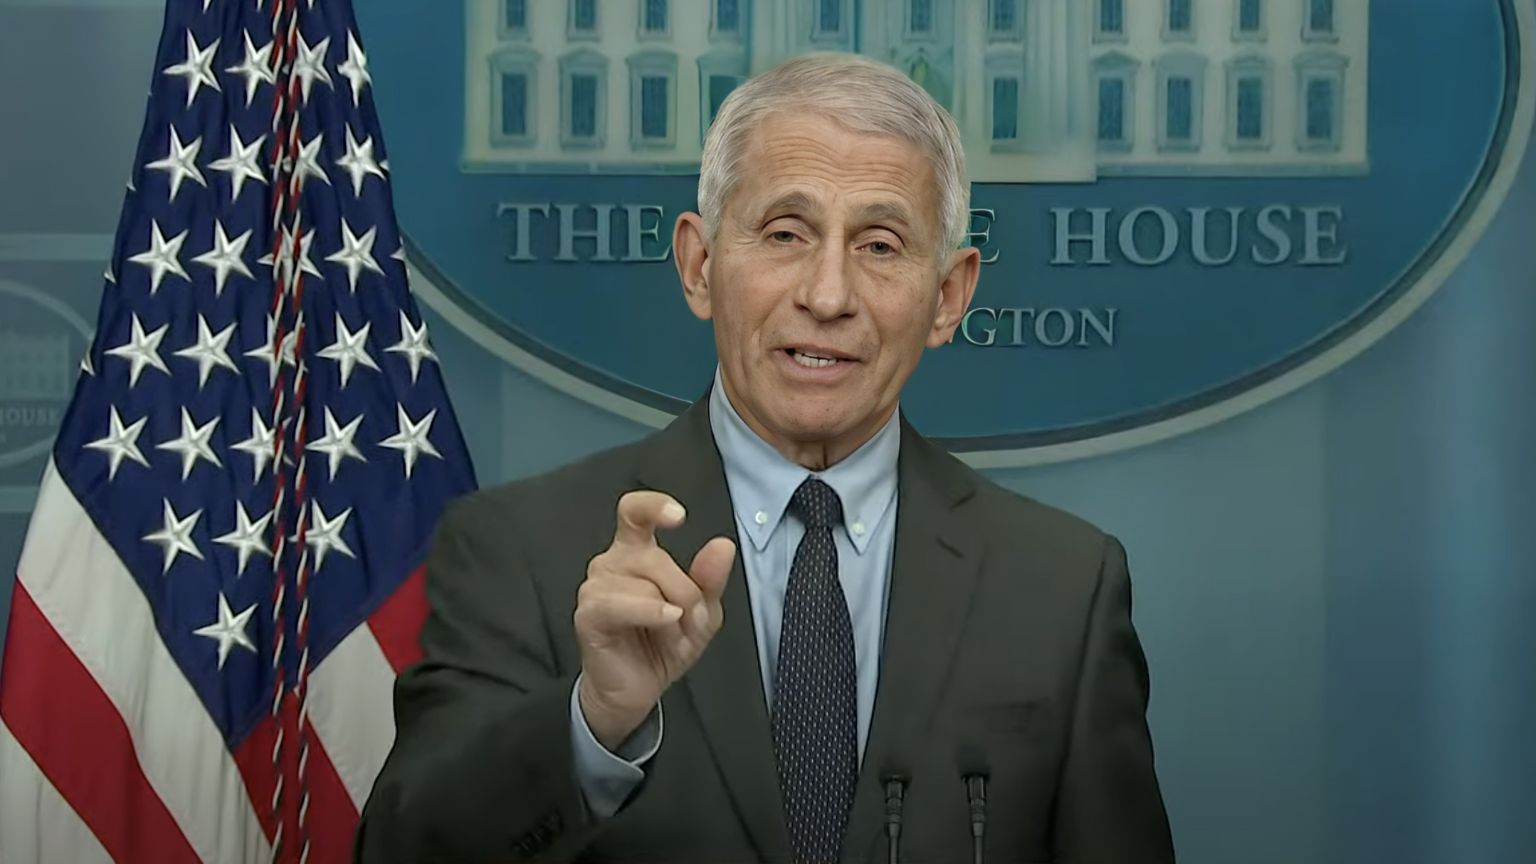 “I have nothing to hide” Fauci says, as he criticizes online “misinformation” in final press briefing